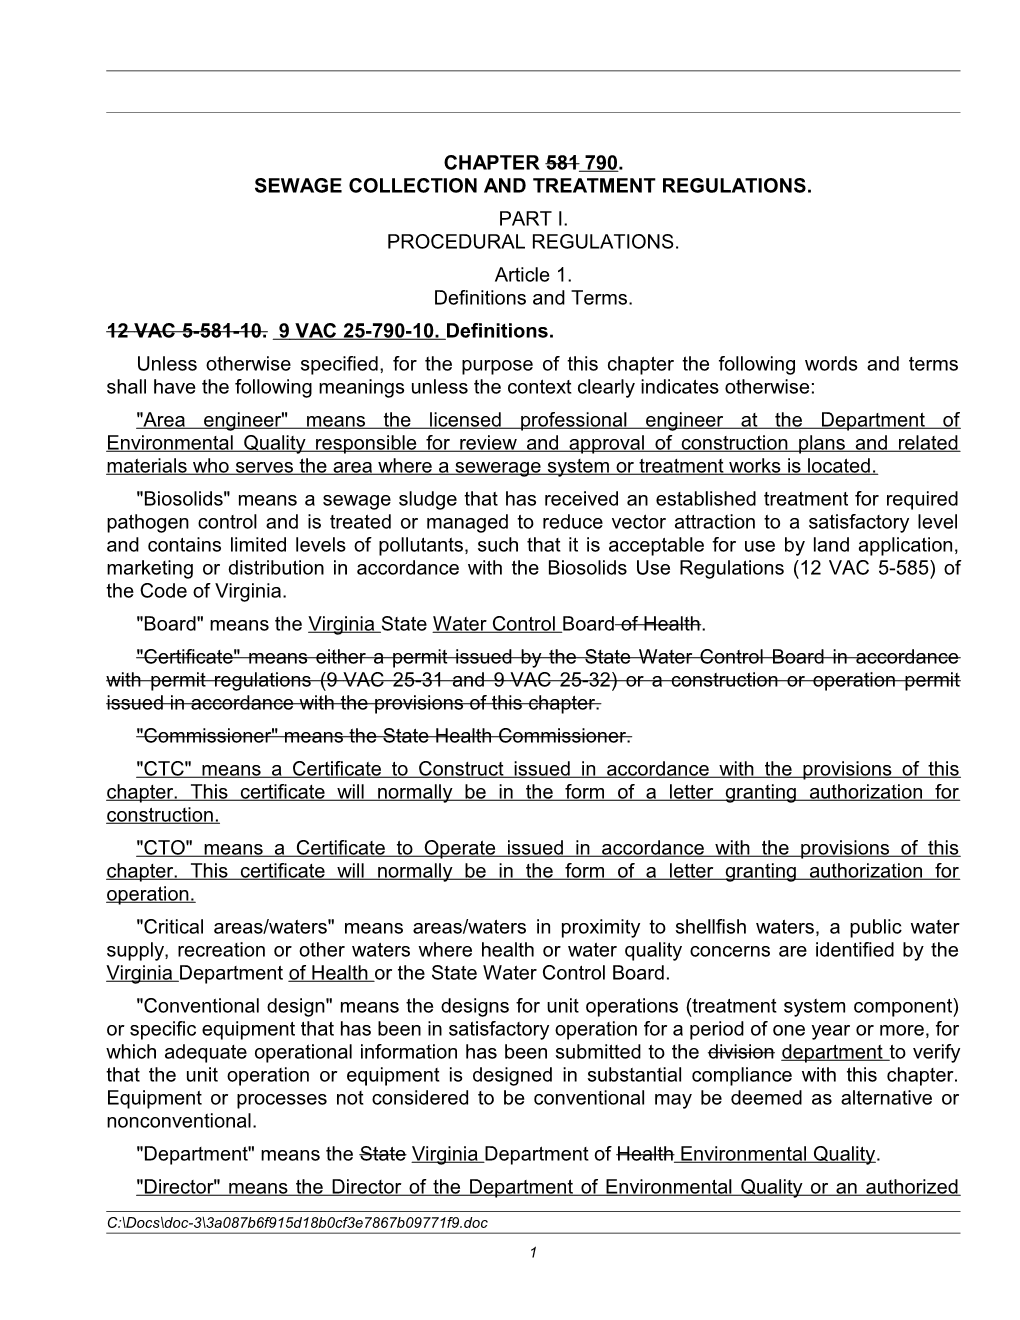 Sewage Collection and Treatment Regulations